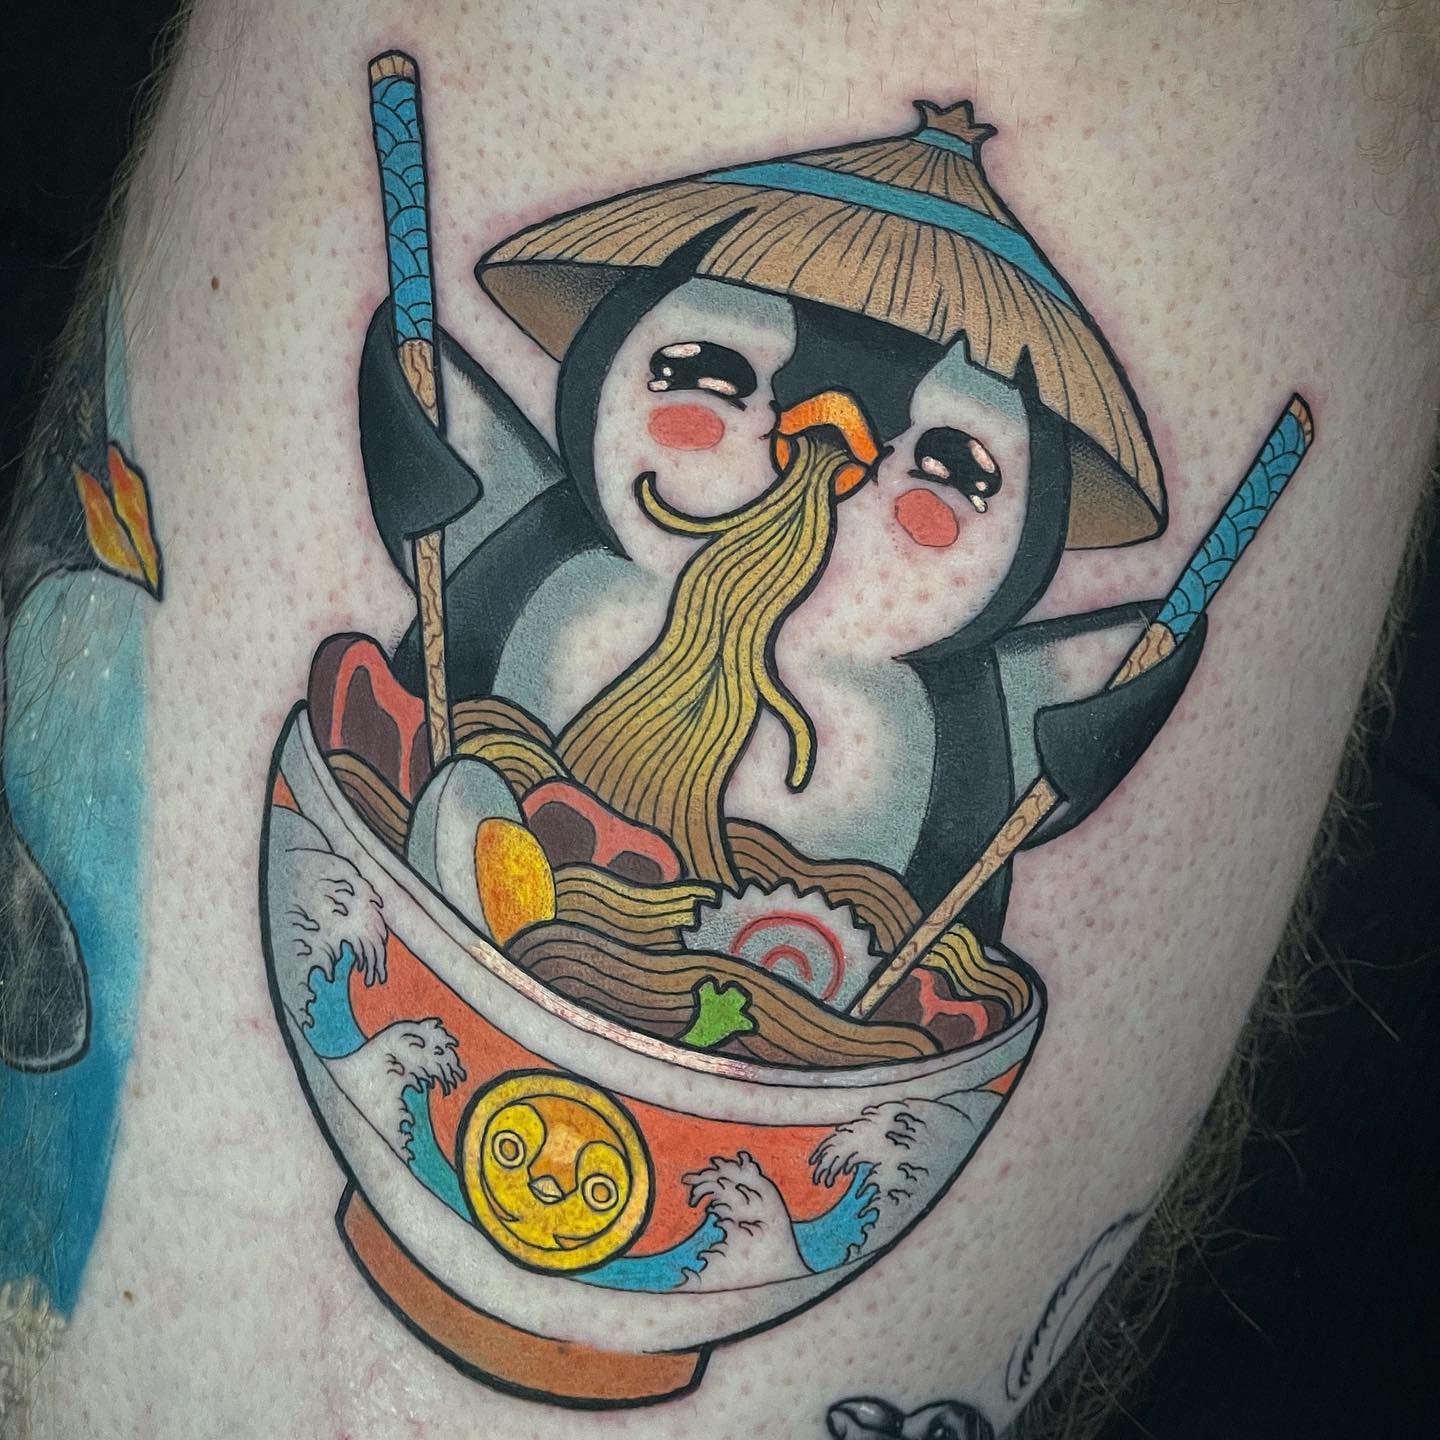 How does 'a penguin bowl' sound? In this colorful and unusual tattoo, a Japanese penguin is waiting for you to melt your heart.